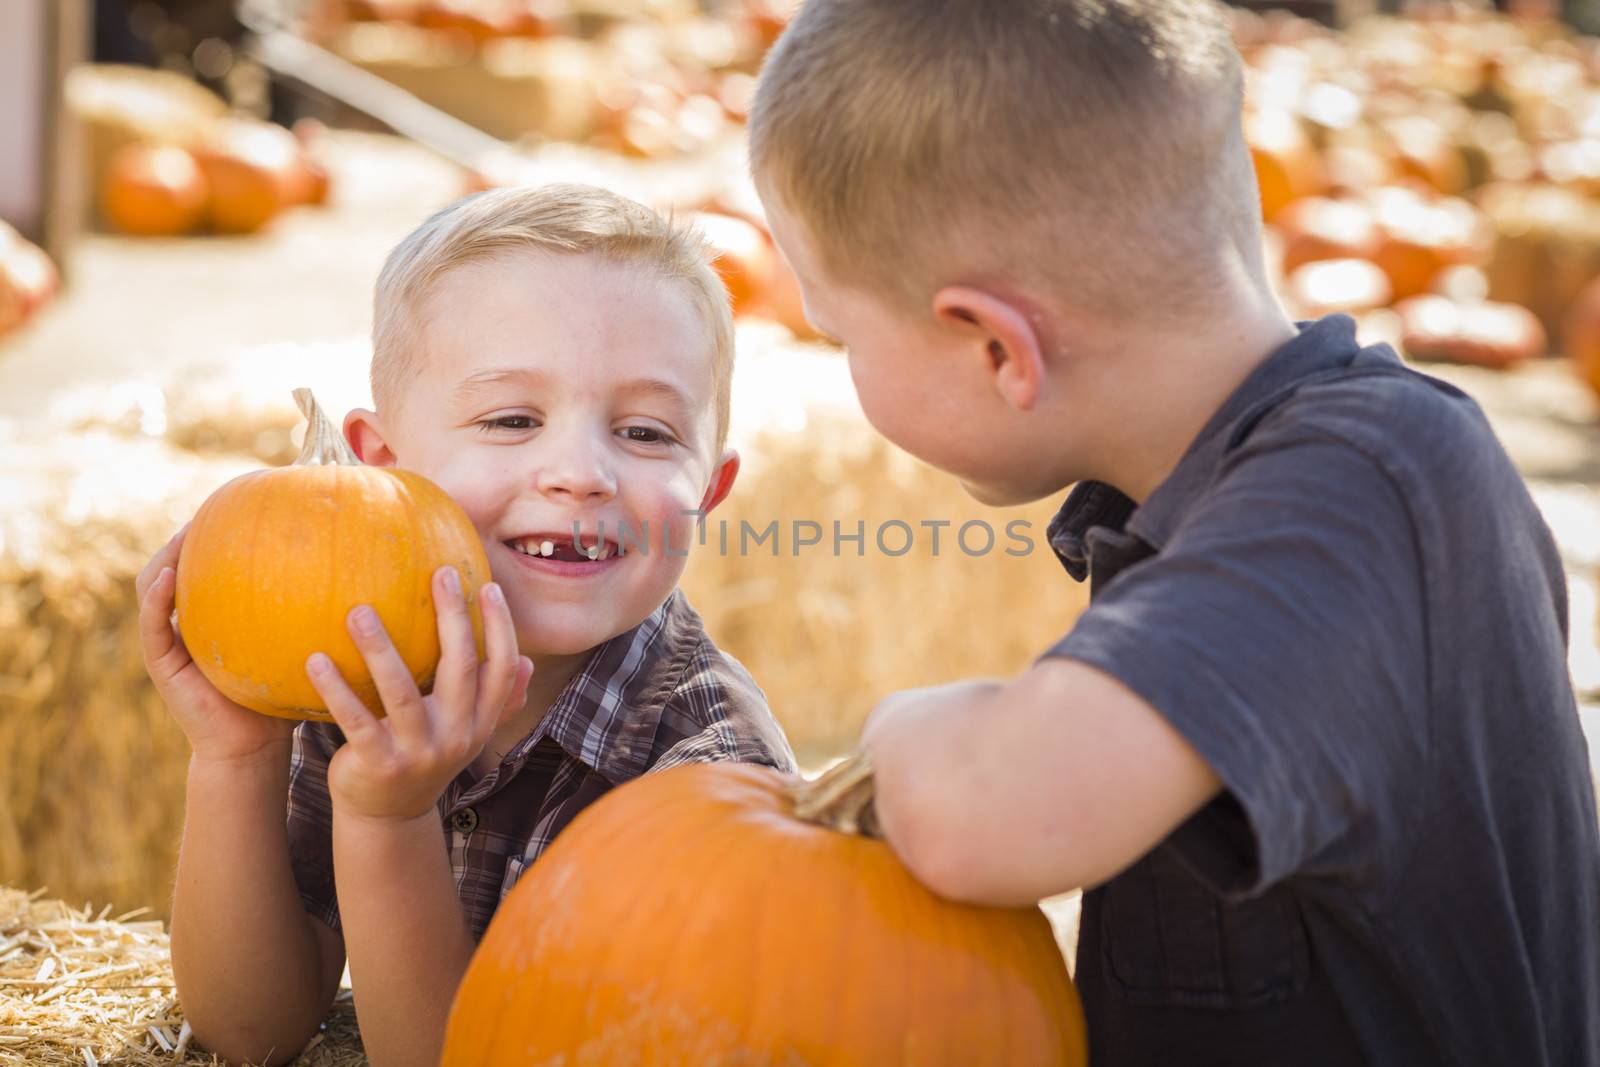 Two Boys at the Pumpkin Patch Talking and Having Fun
 by Feverpitched